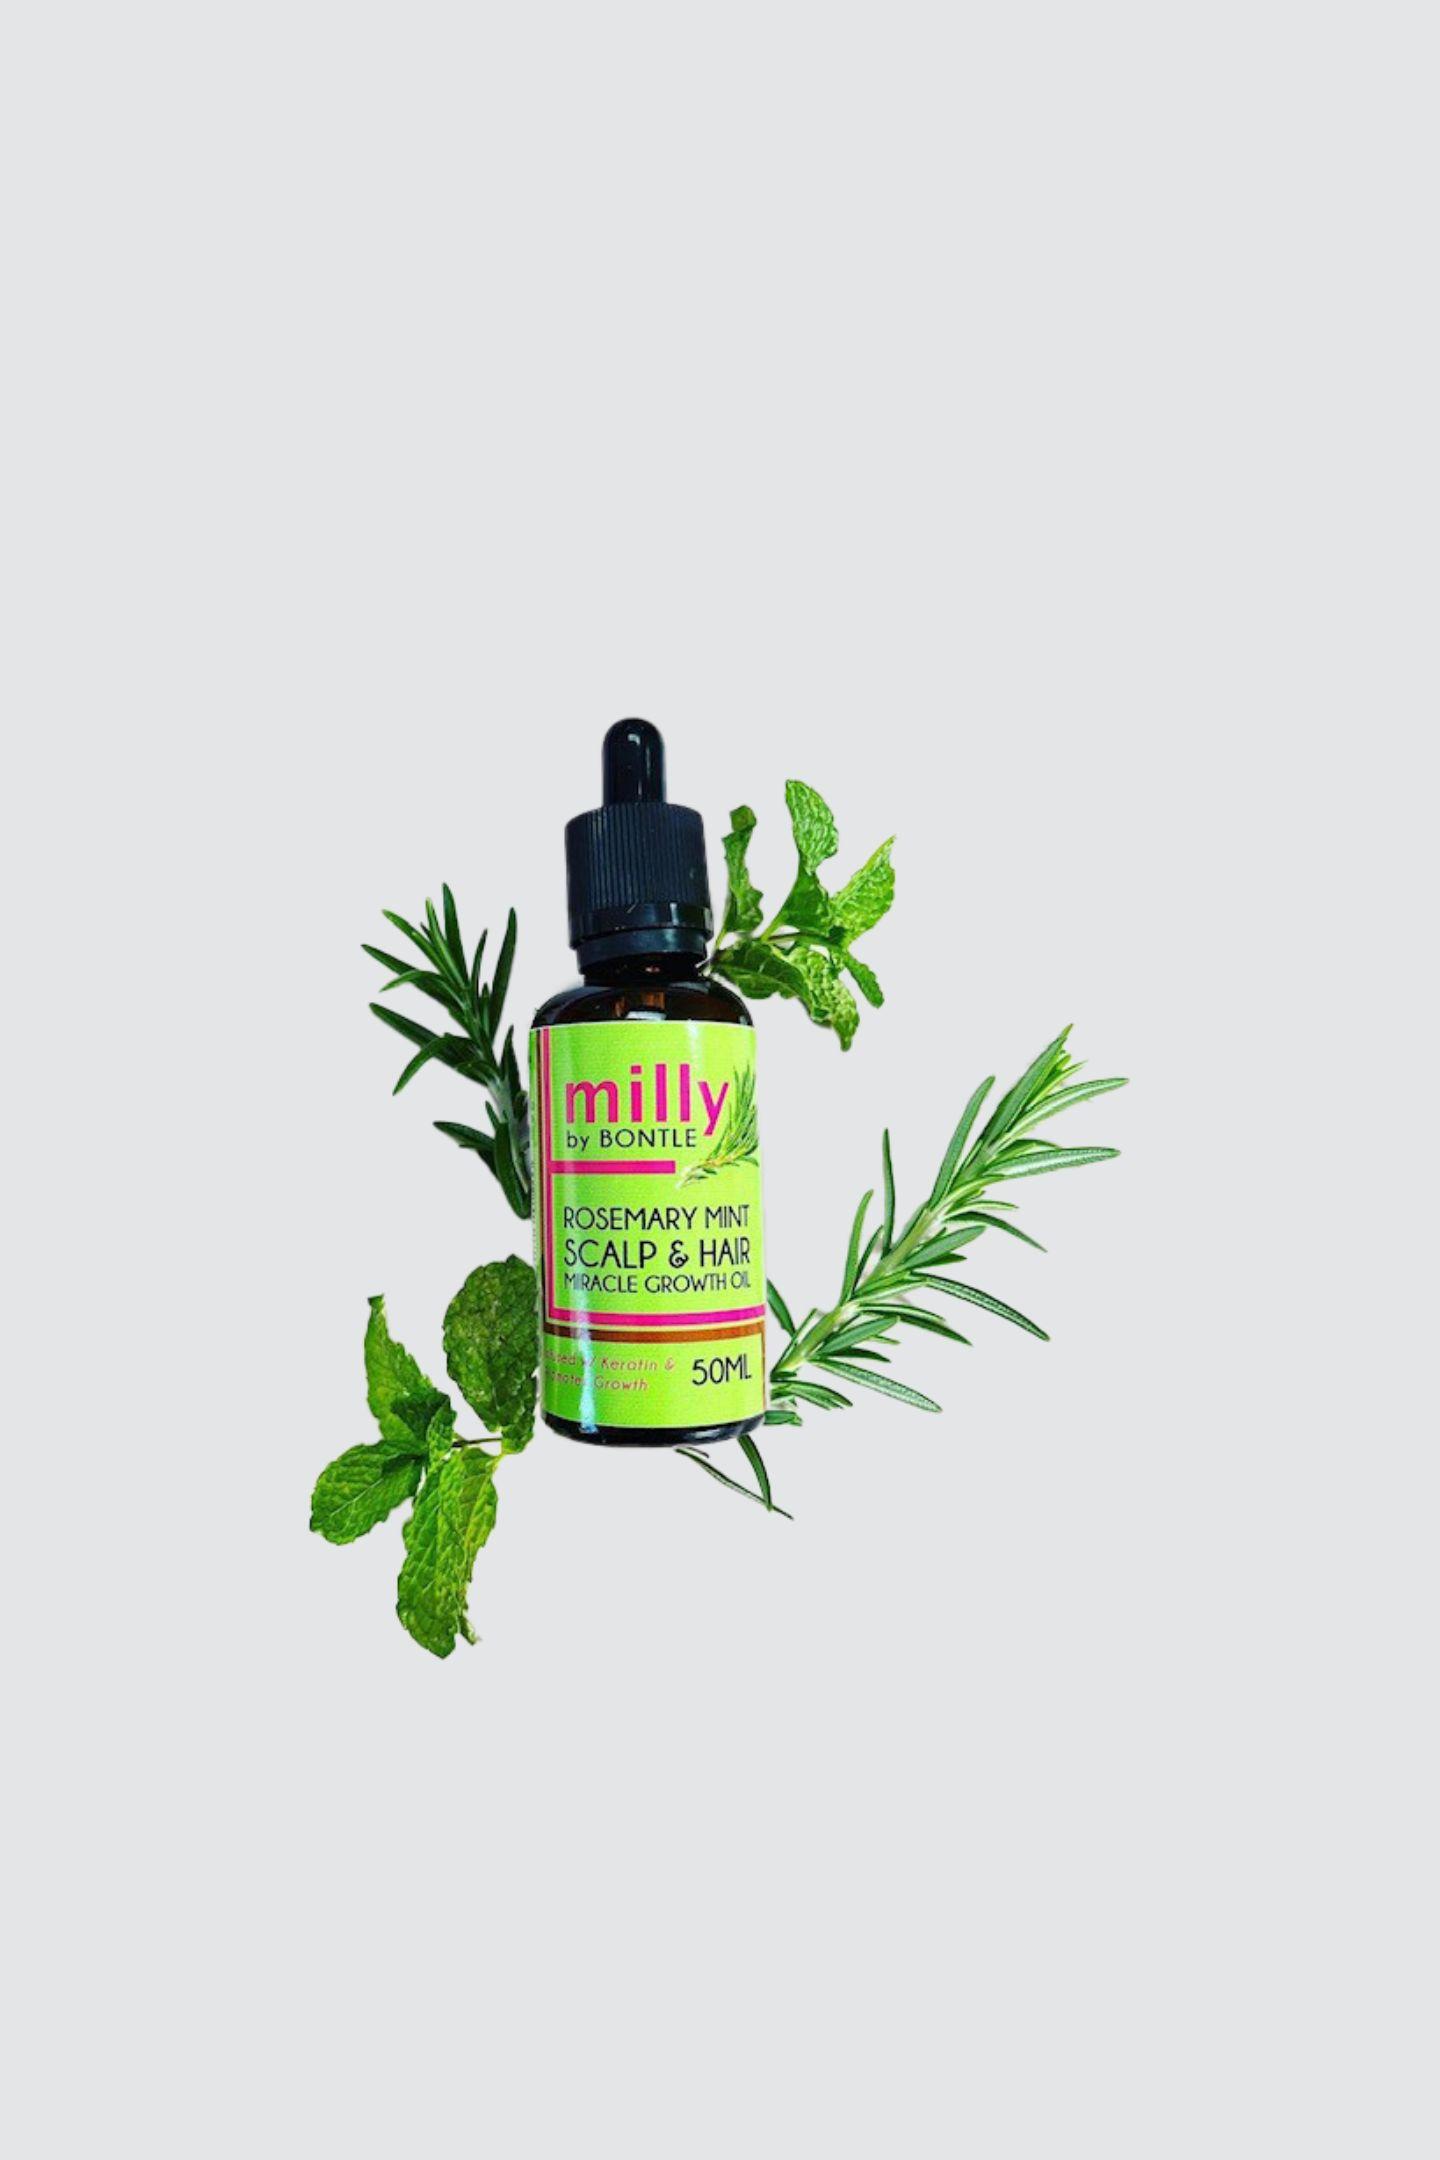 Milly by Bontle Rosemary Mint Scalp & Hair Miracle Growth Oil 50ml ...